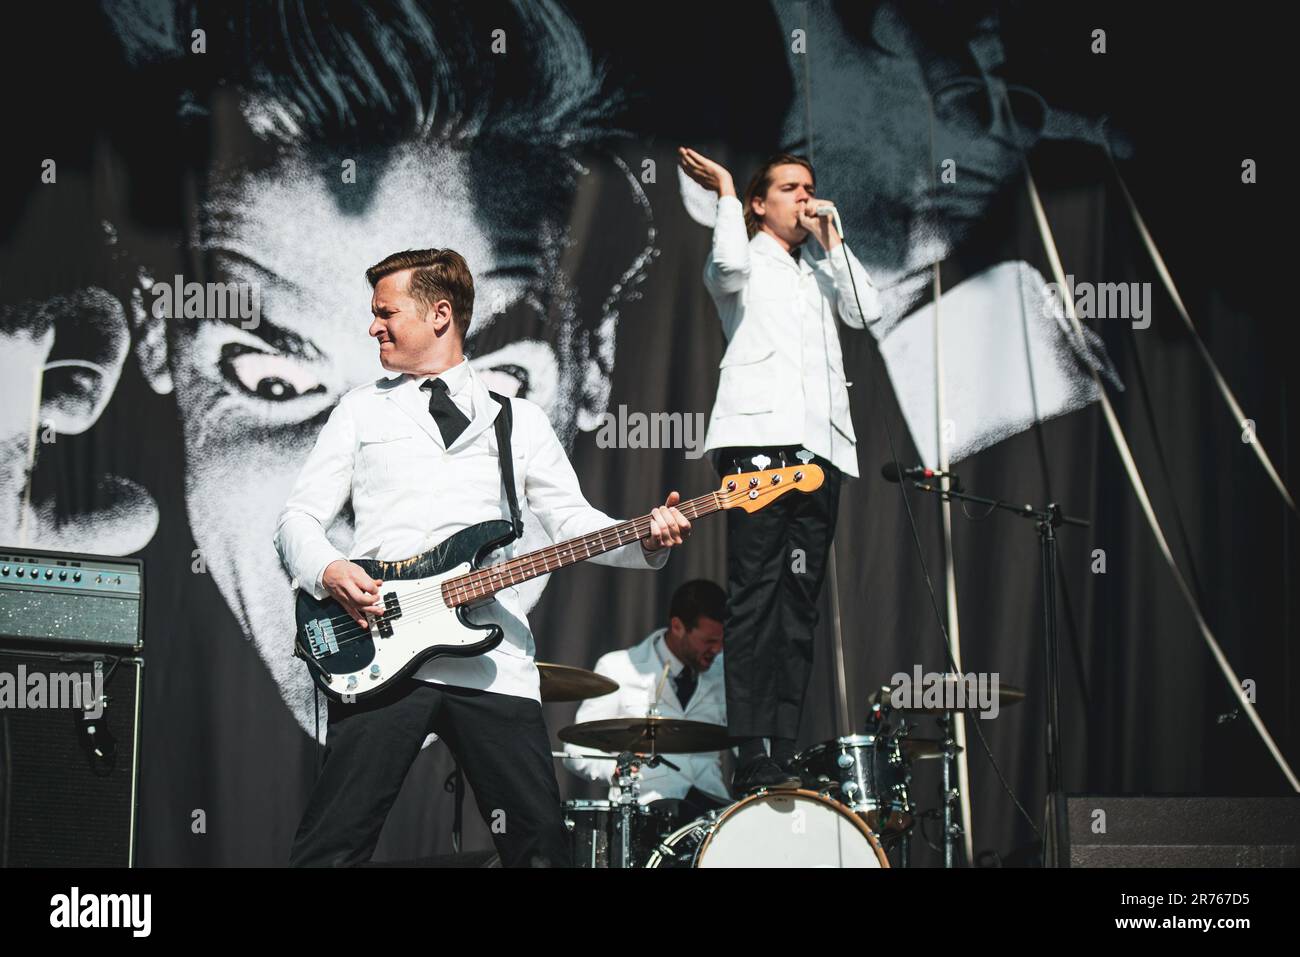 MUNICH, GERMANY ROCKAVARIA FESTIVAL: The Swedish band The Hives performing live on stage at the first edition of the Rockavaria Festival. Stock Photo